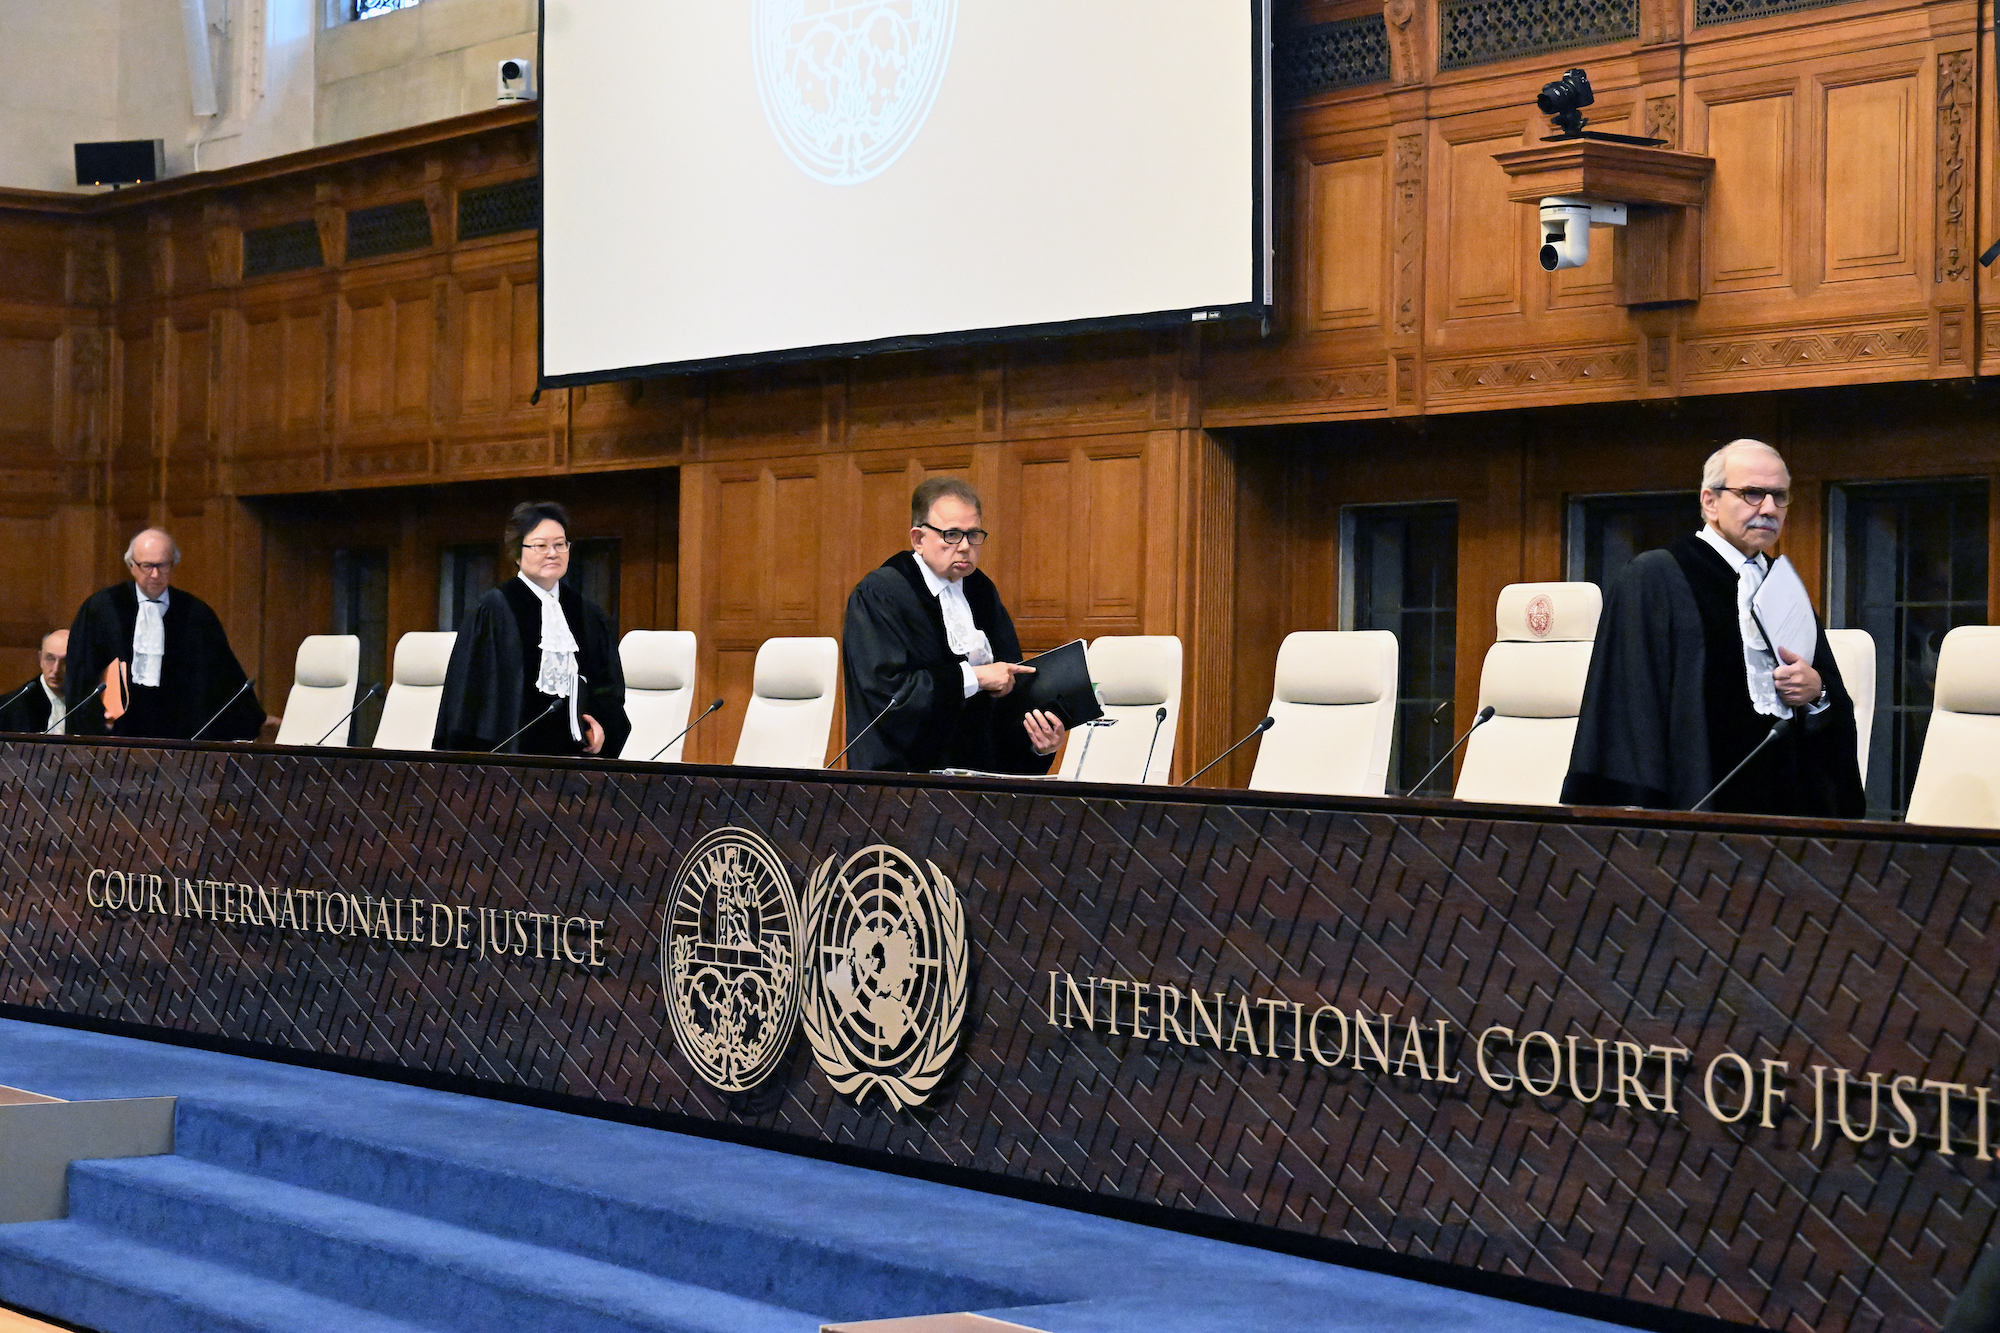 International Court of Justice members are seen in The Hague, Netherlands, on January 11.